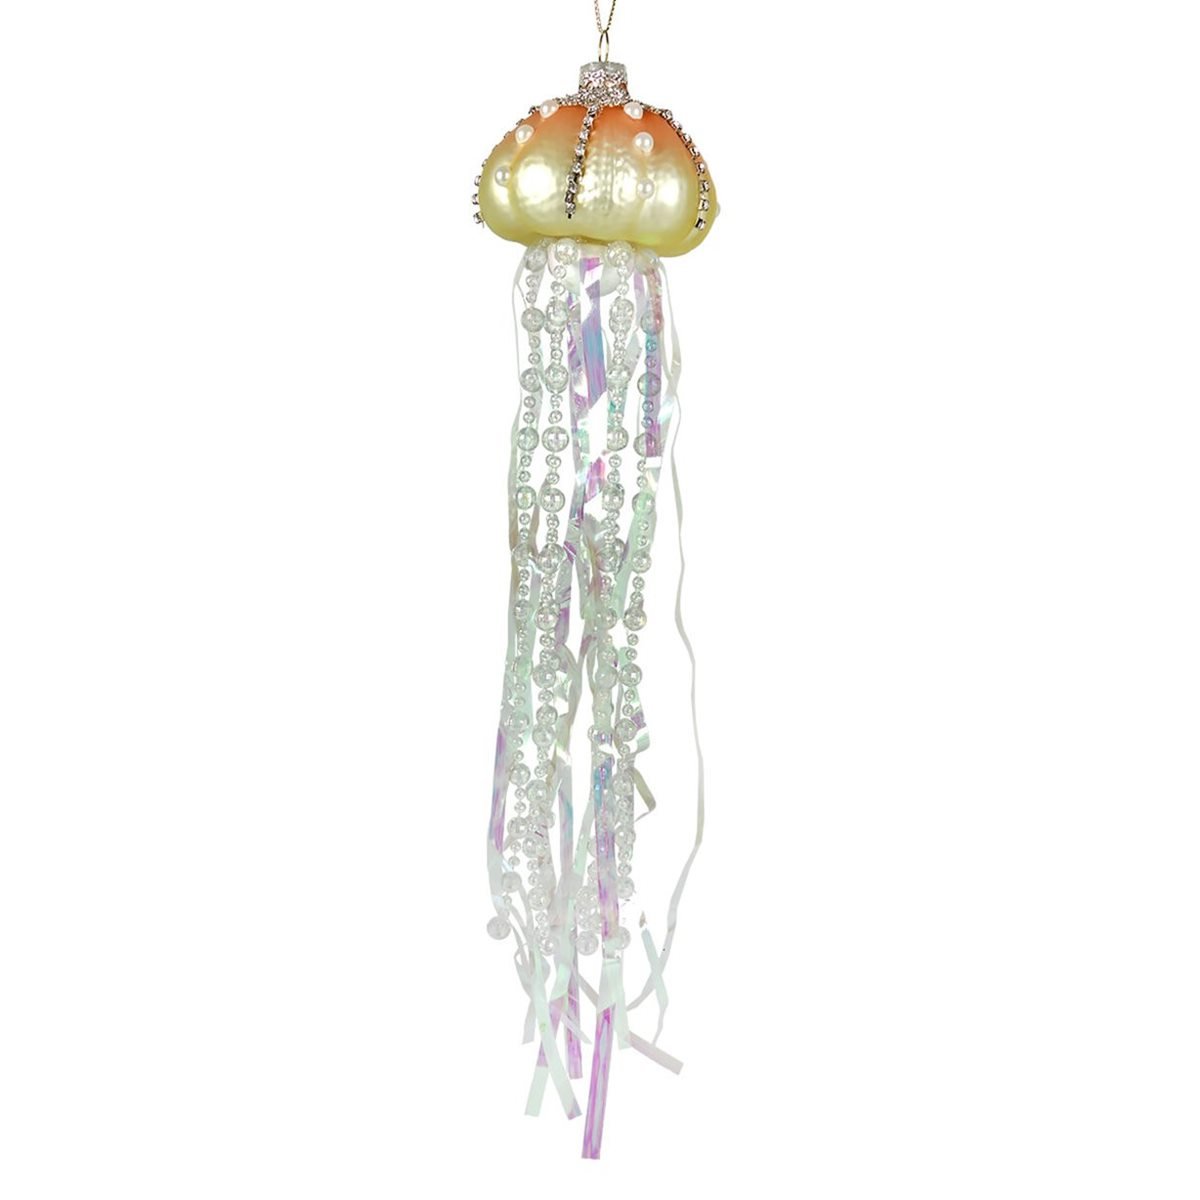 Jeweled Jellyfish with Long Tentacles Ornament